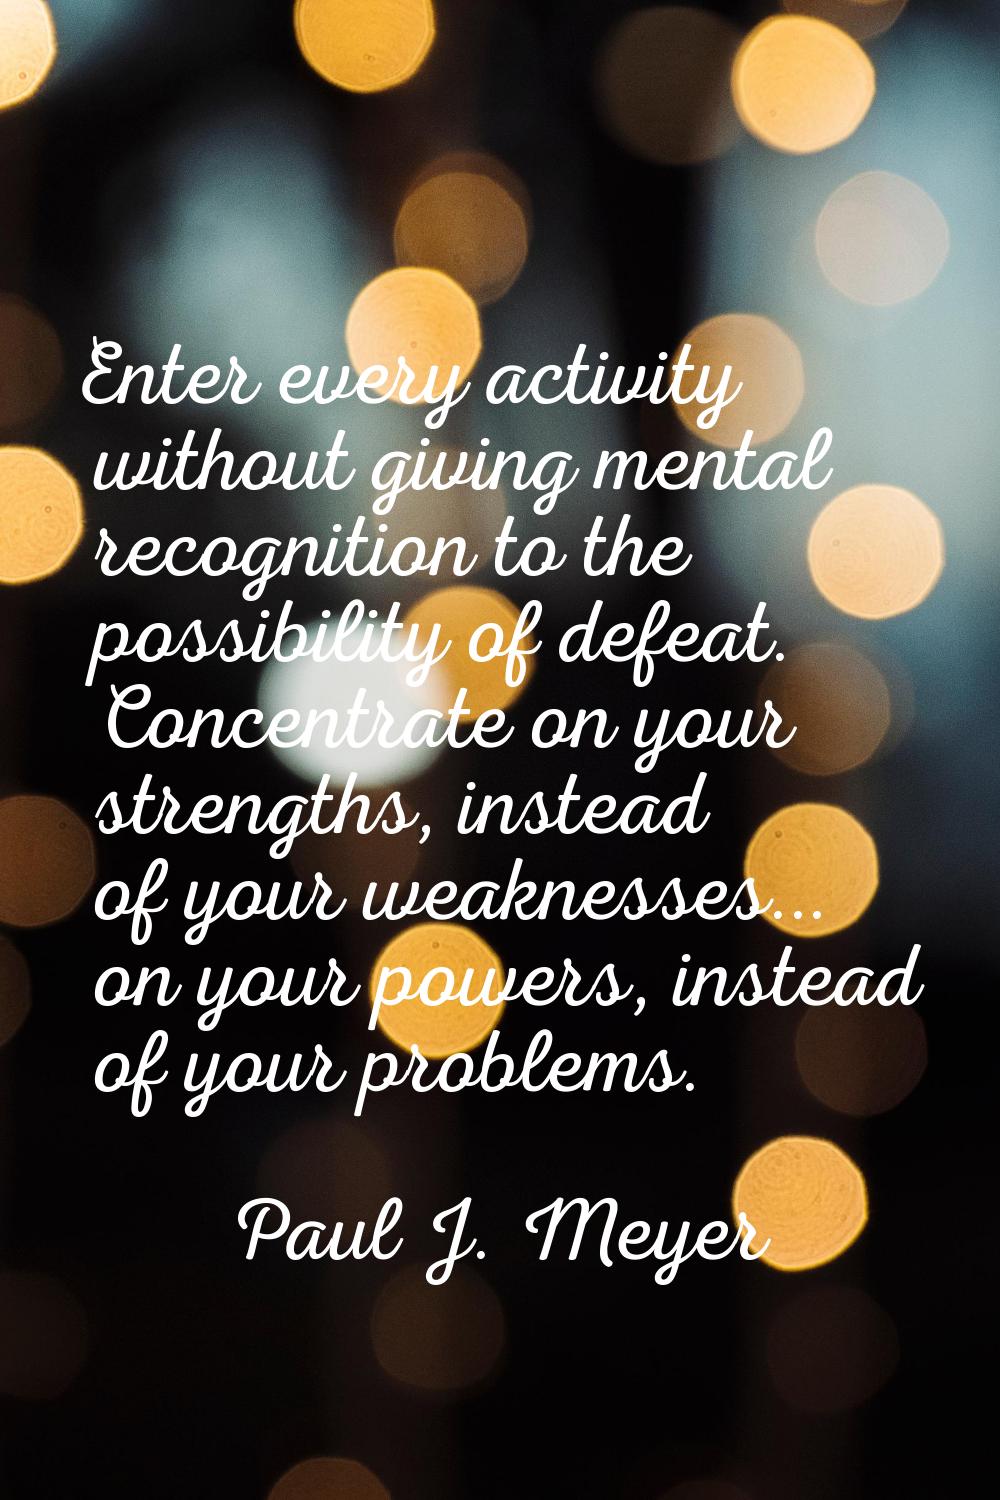 Enter every activity without giving mental recognition to the possibility of defeat. Concentrate on